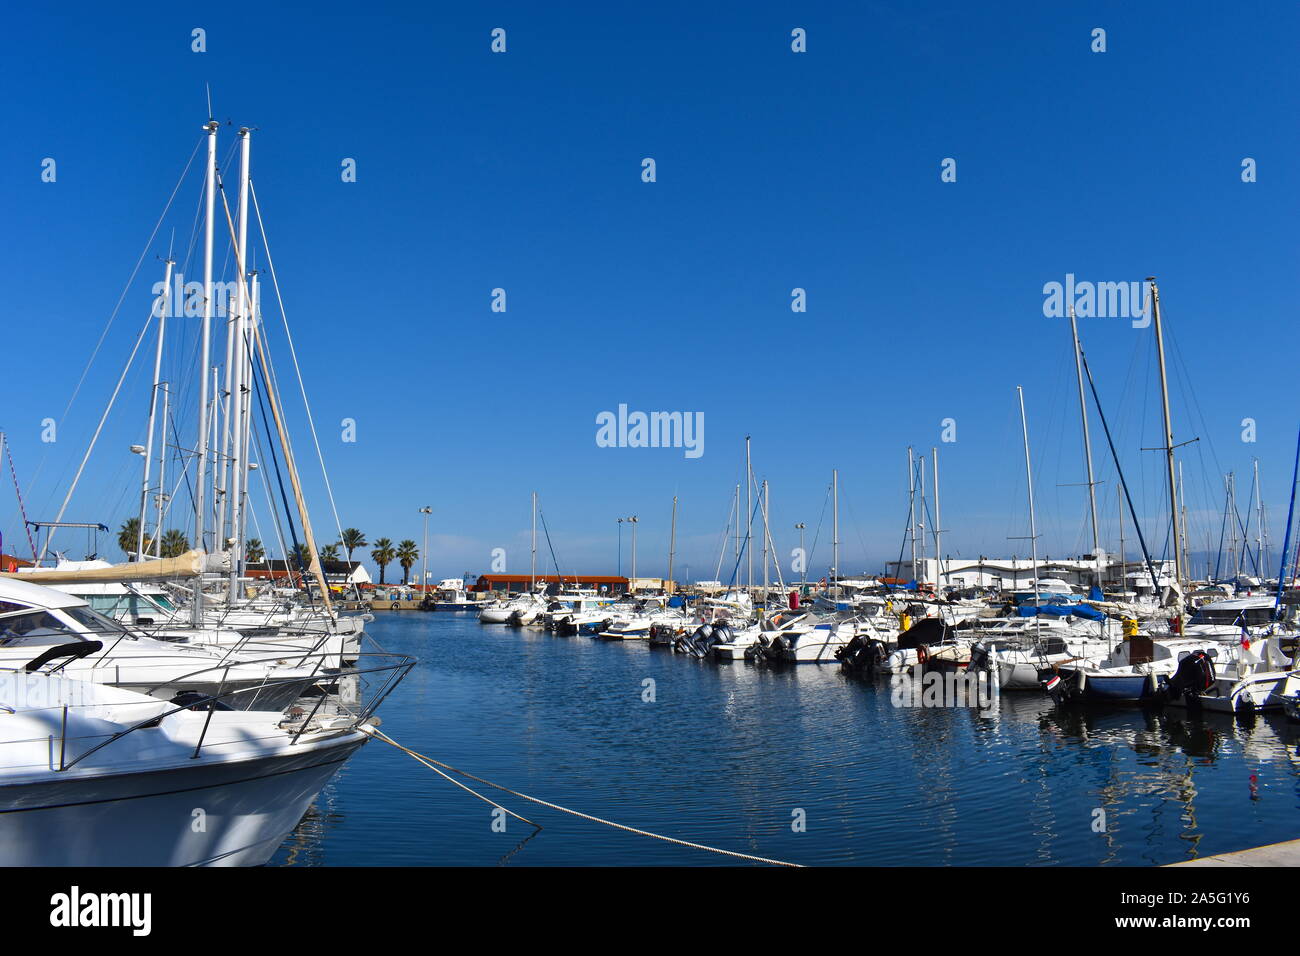 Sailboats on water pictured on a sunny day in the French Riviera. Luxury yachts on the dock marina in a resort in south of France. Tall palm trees. Stock Photo